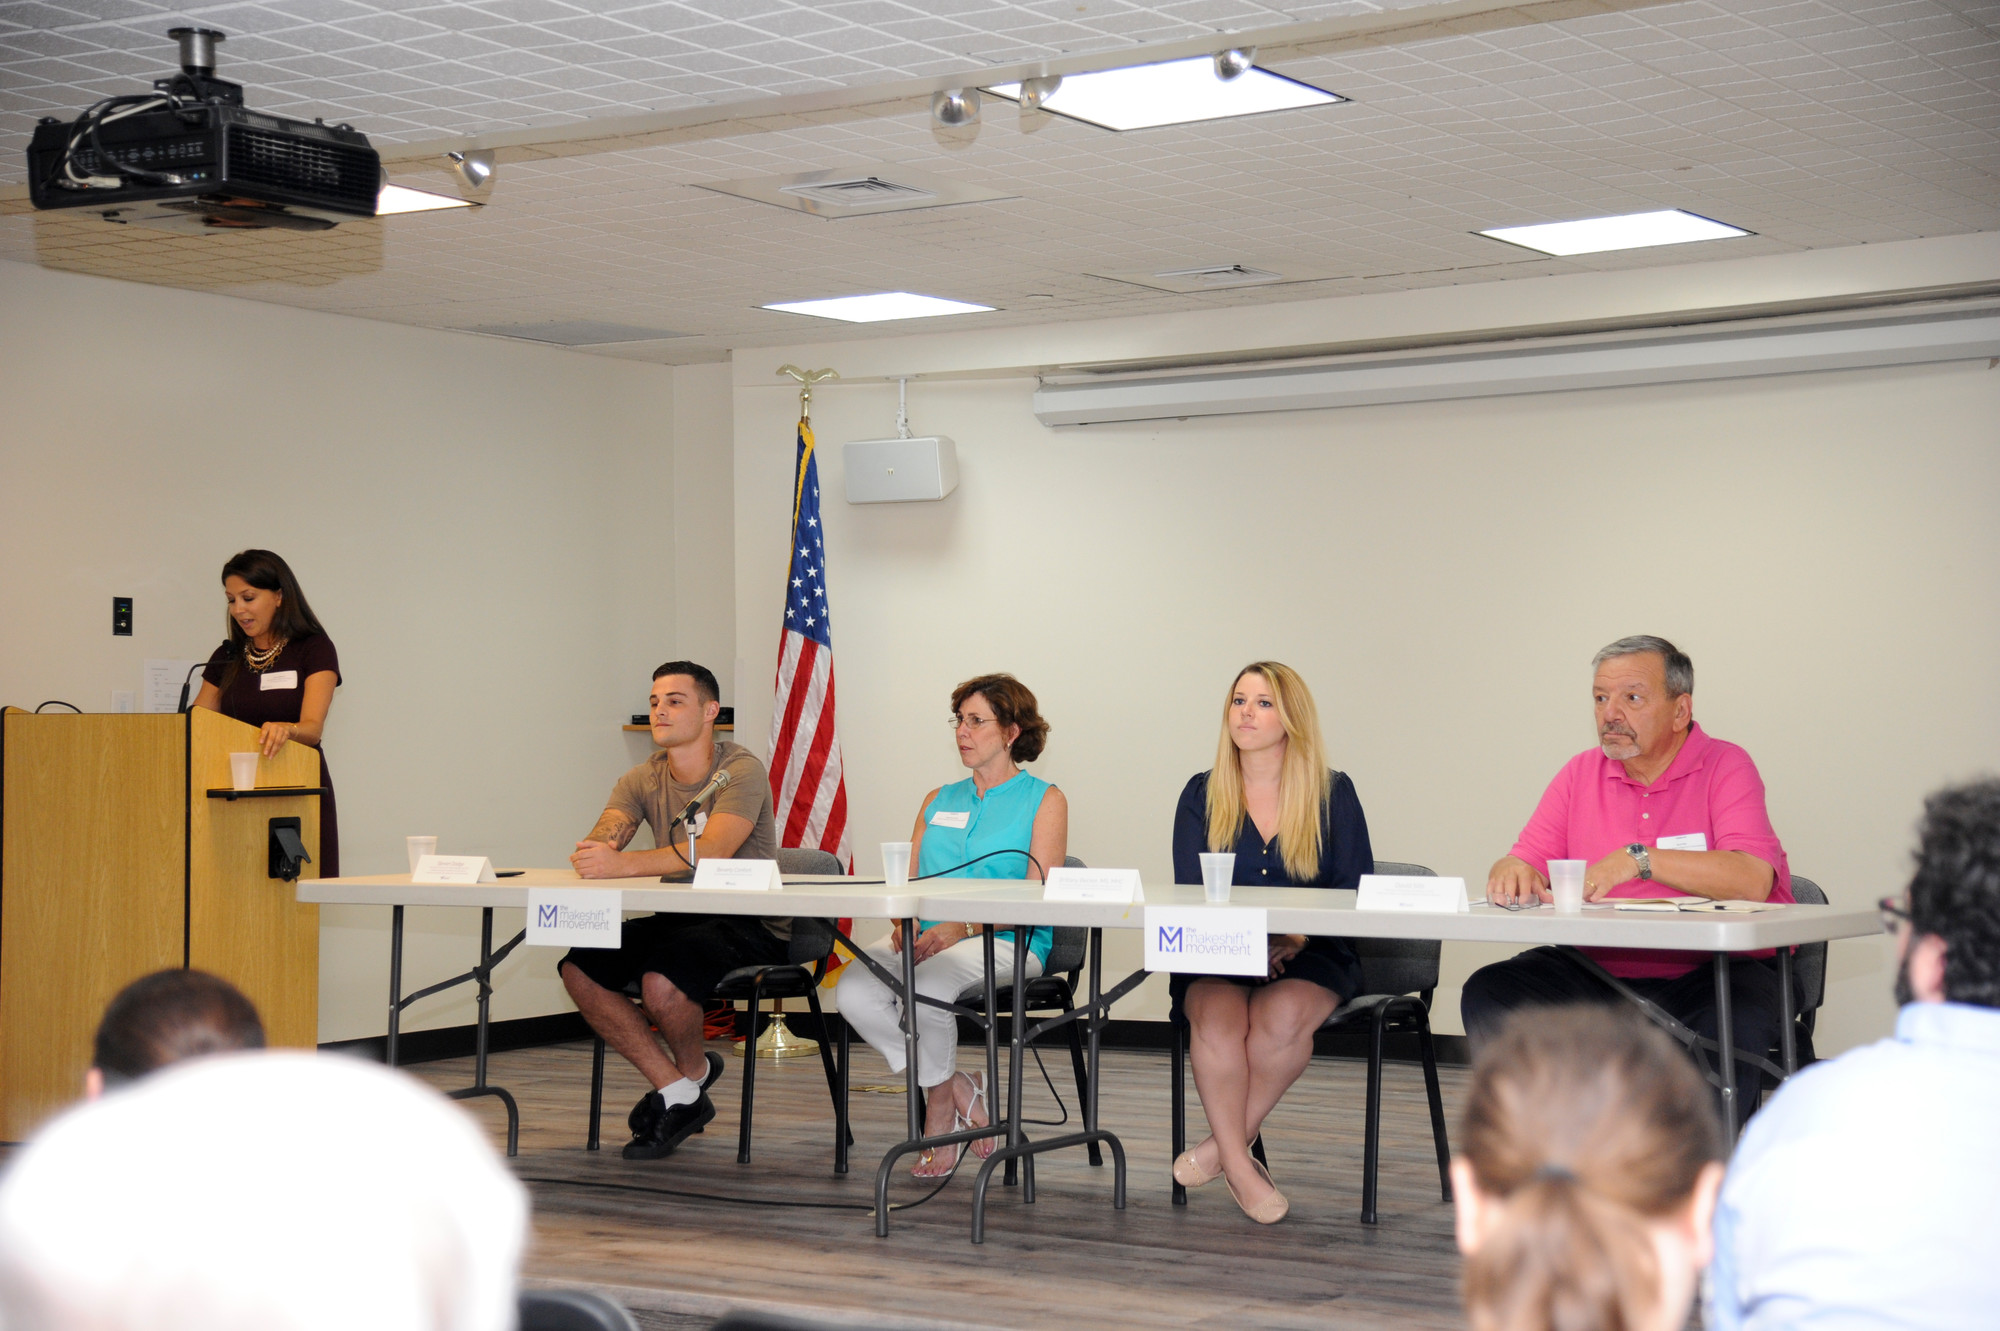 Jessica DiRocco spoke to panel members Steven Dodge, Beverly Conforti, Brittany Becker and David Sills.